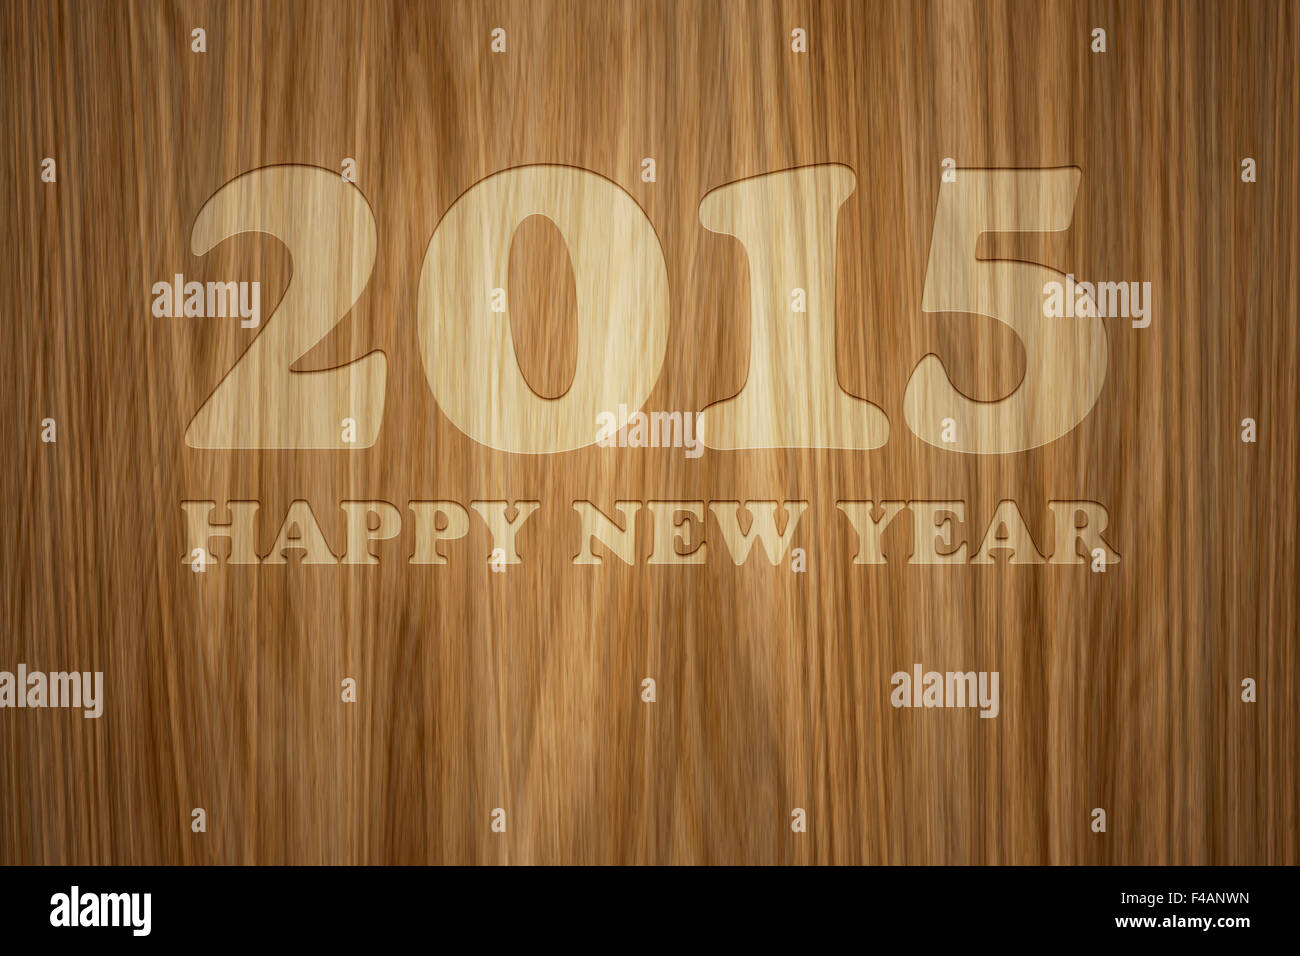 wood engraved 2015 Happy New Year Stock Photo